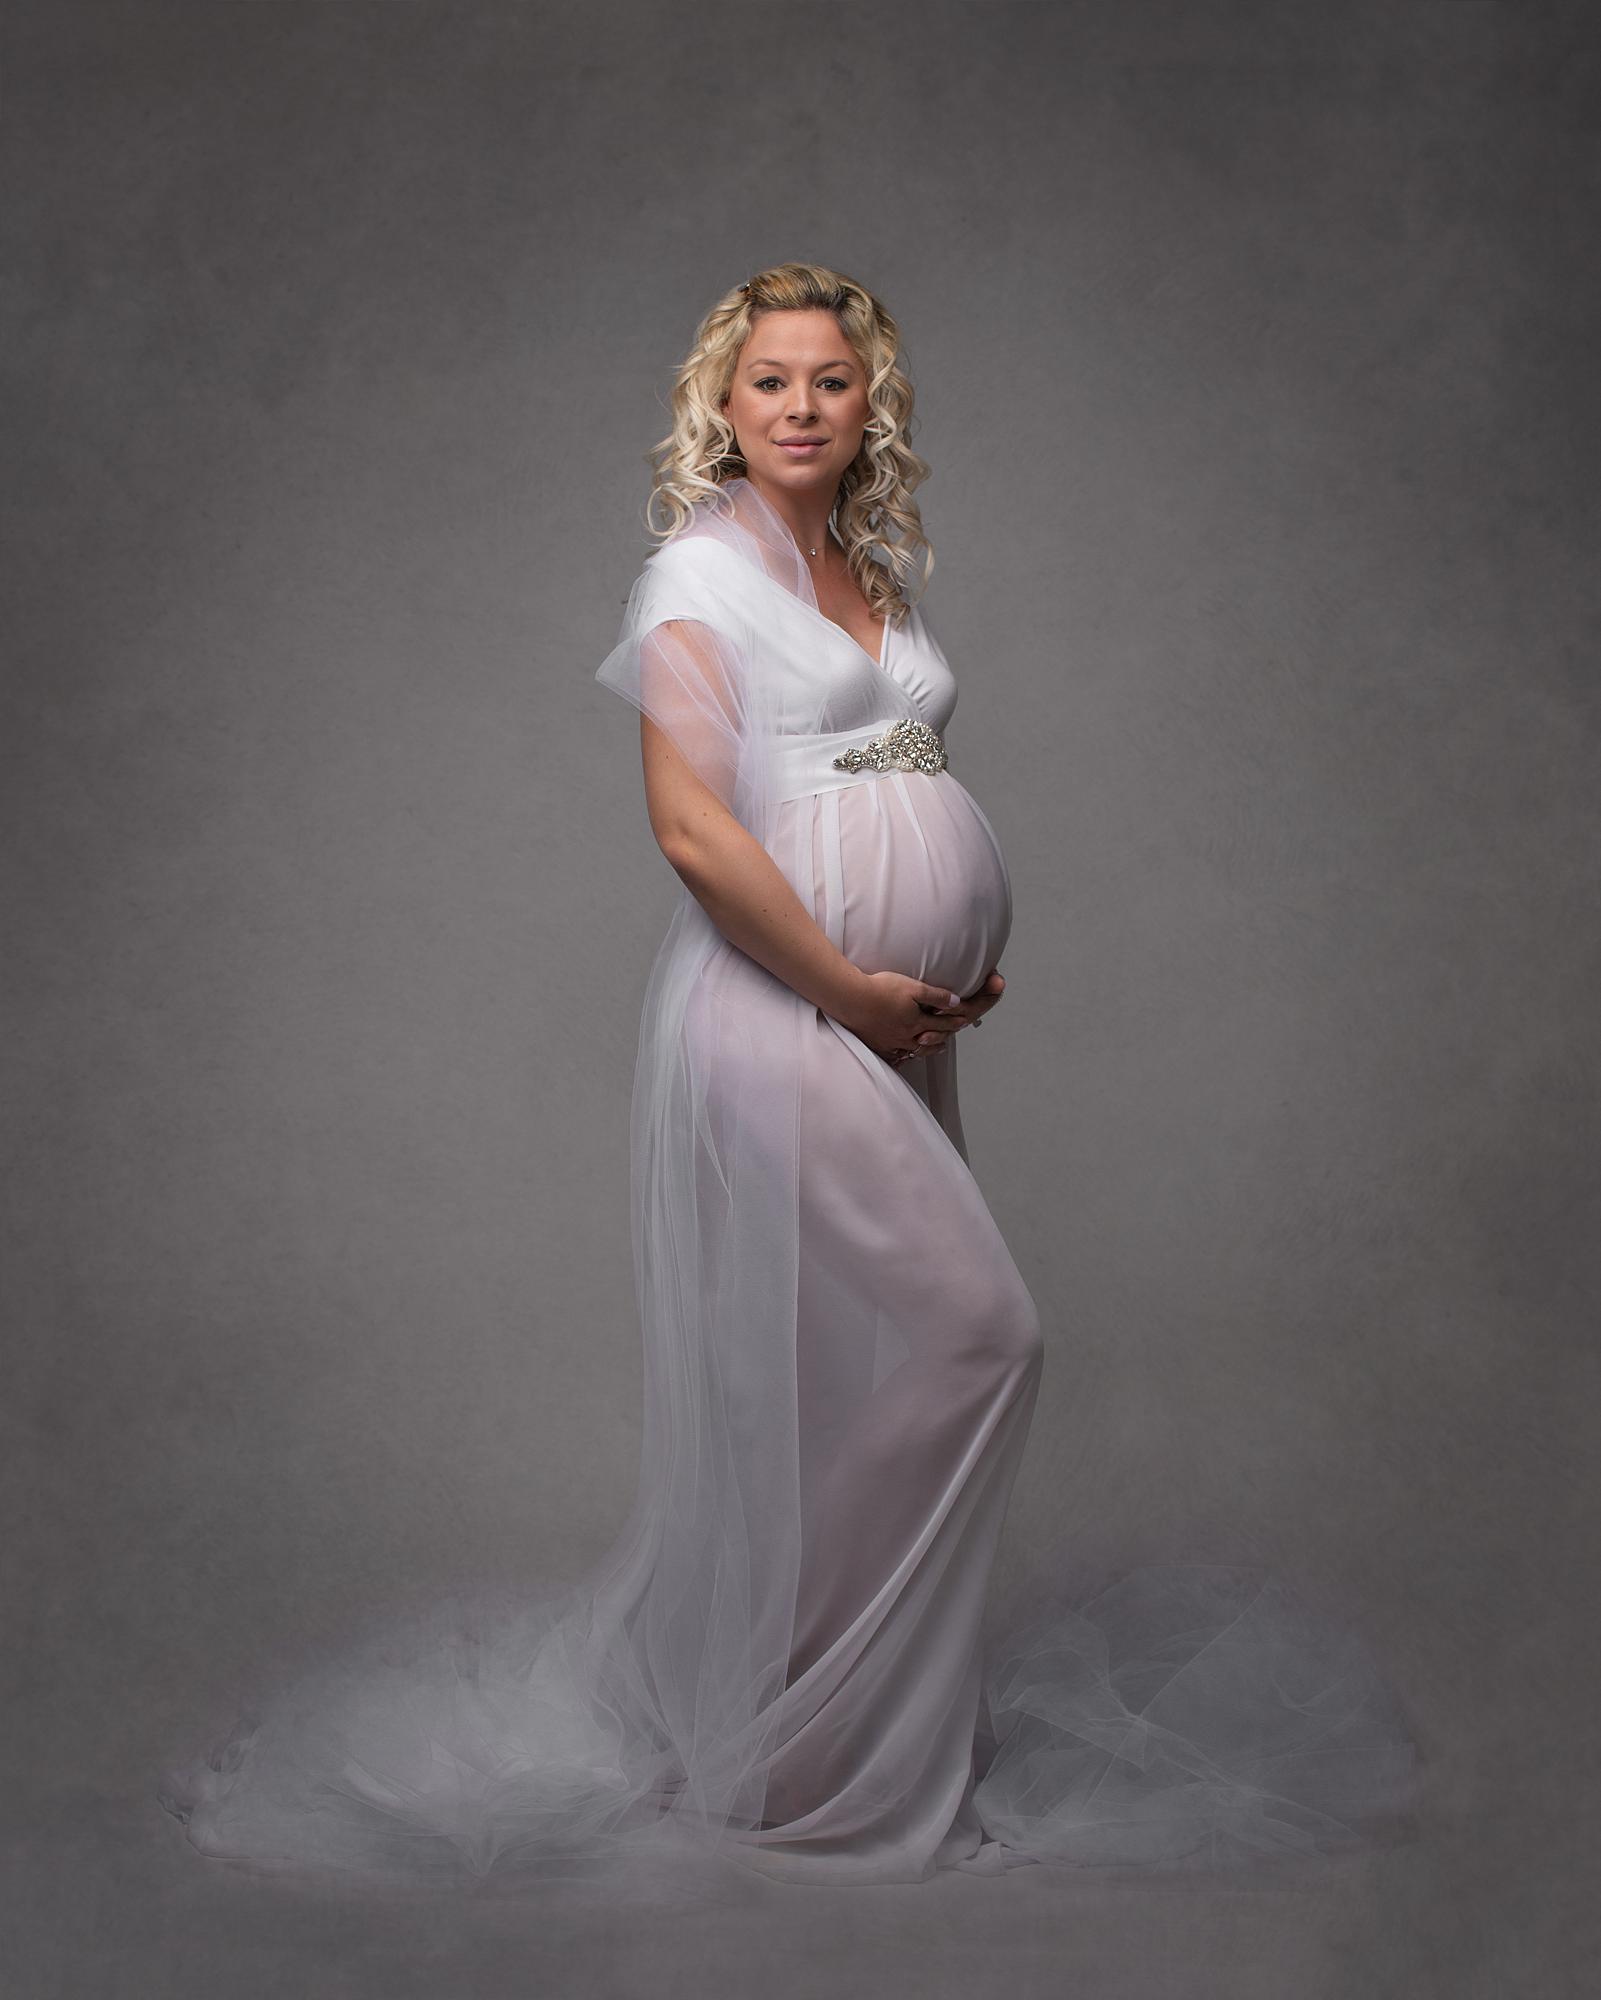 Pregnant woman posing in a white dress against a grey backdrop for a maternity photoshoot in Suffolk photography studio